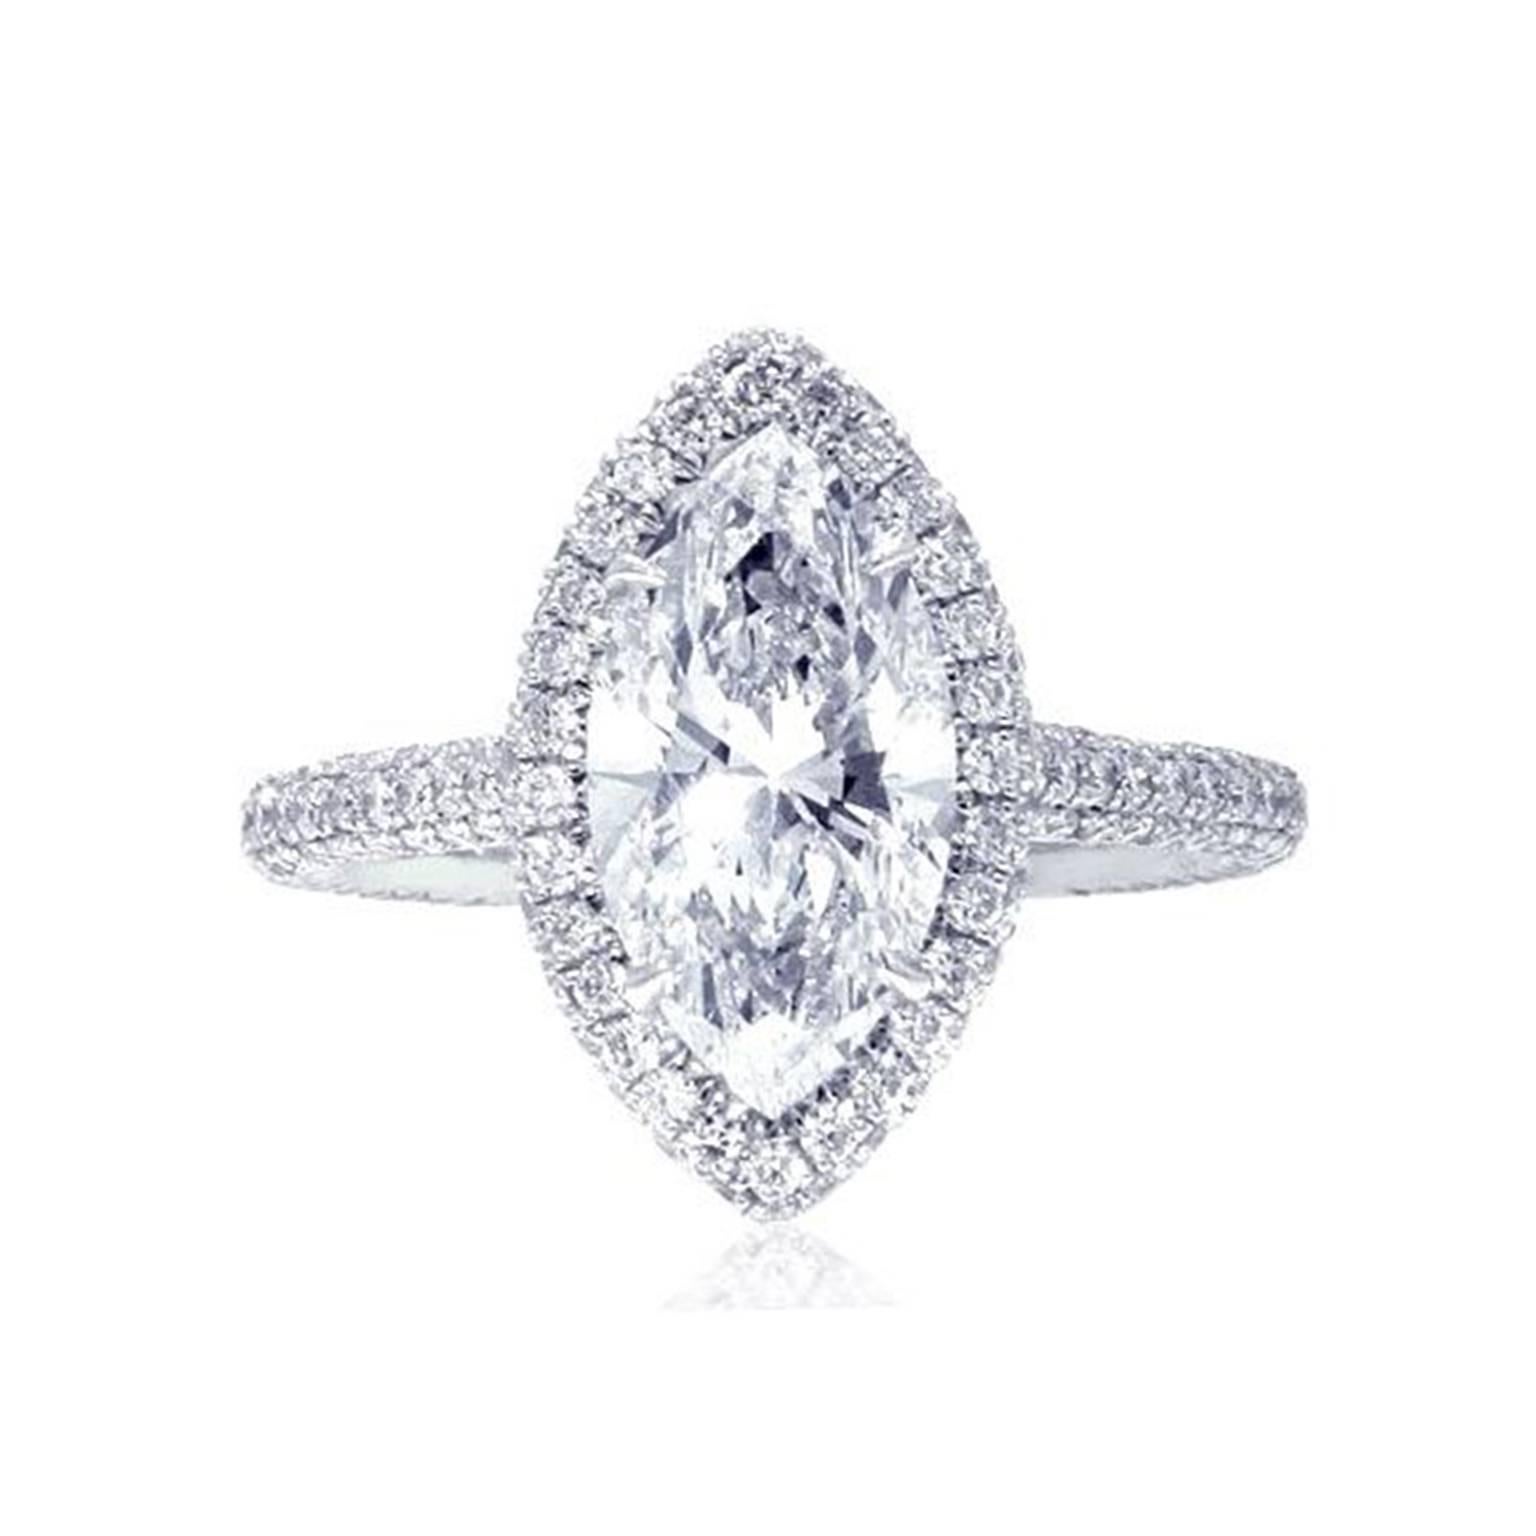 Stunning Platinum Engagement Ring with 2.00 Carats GIA Certifies D-VS1 Marquise Diamond surrounded by 1.26 Carats of side Diamonds. Comes in 6 size.